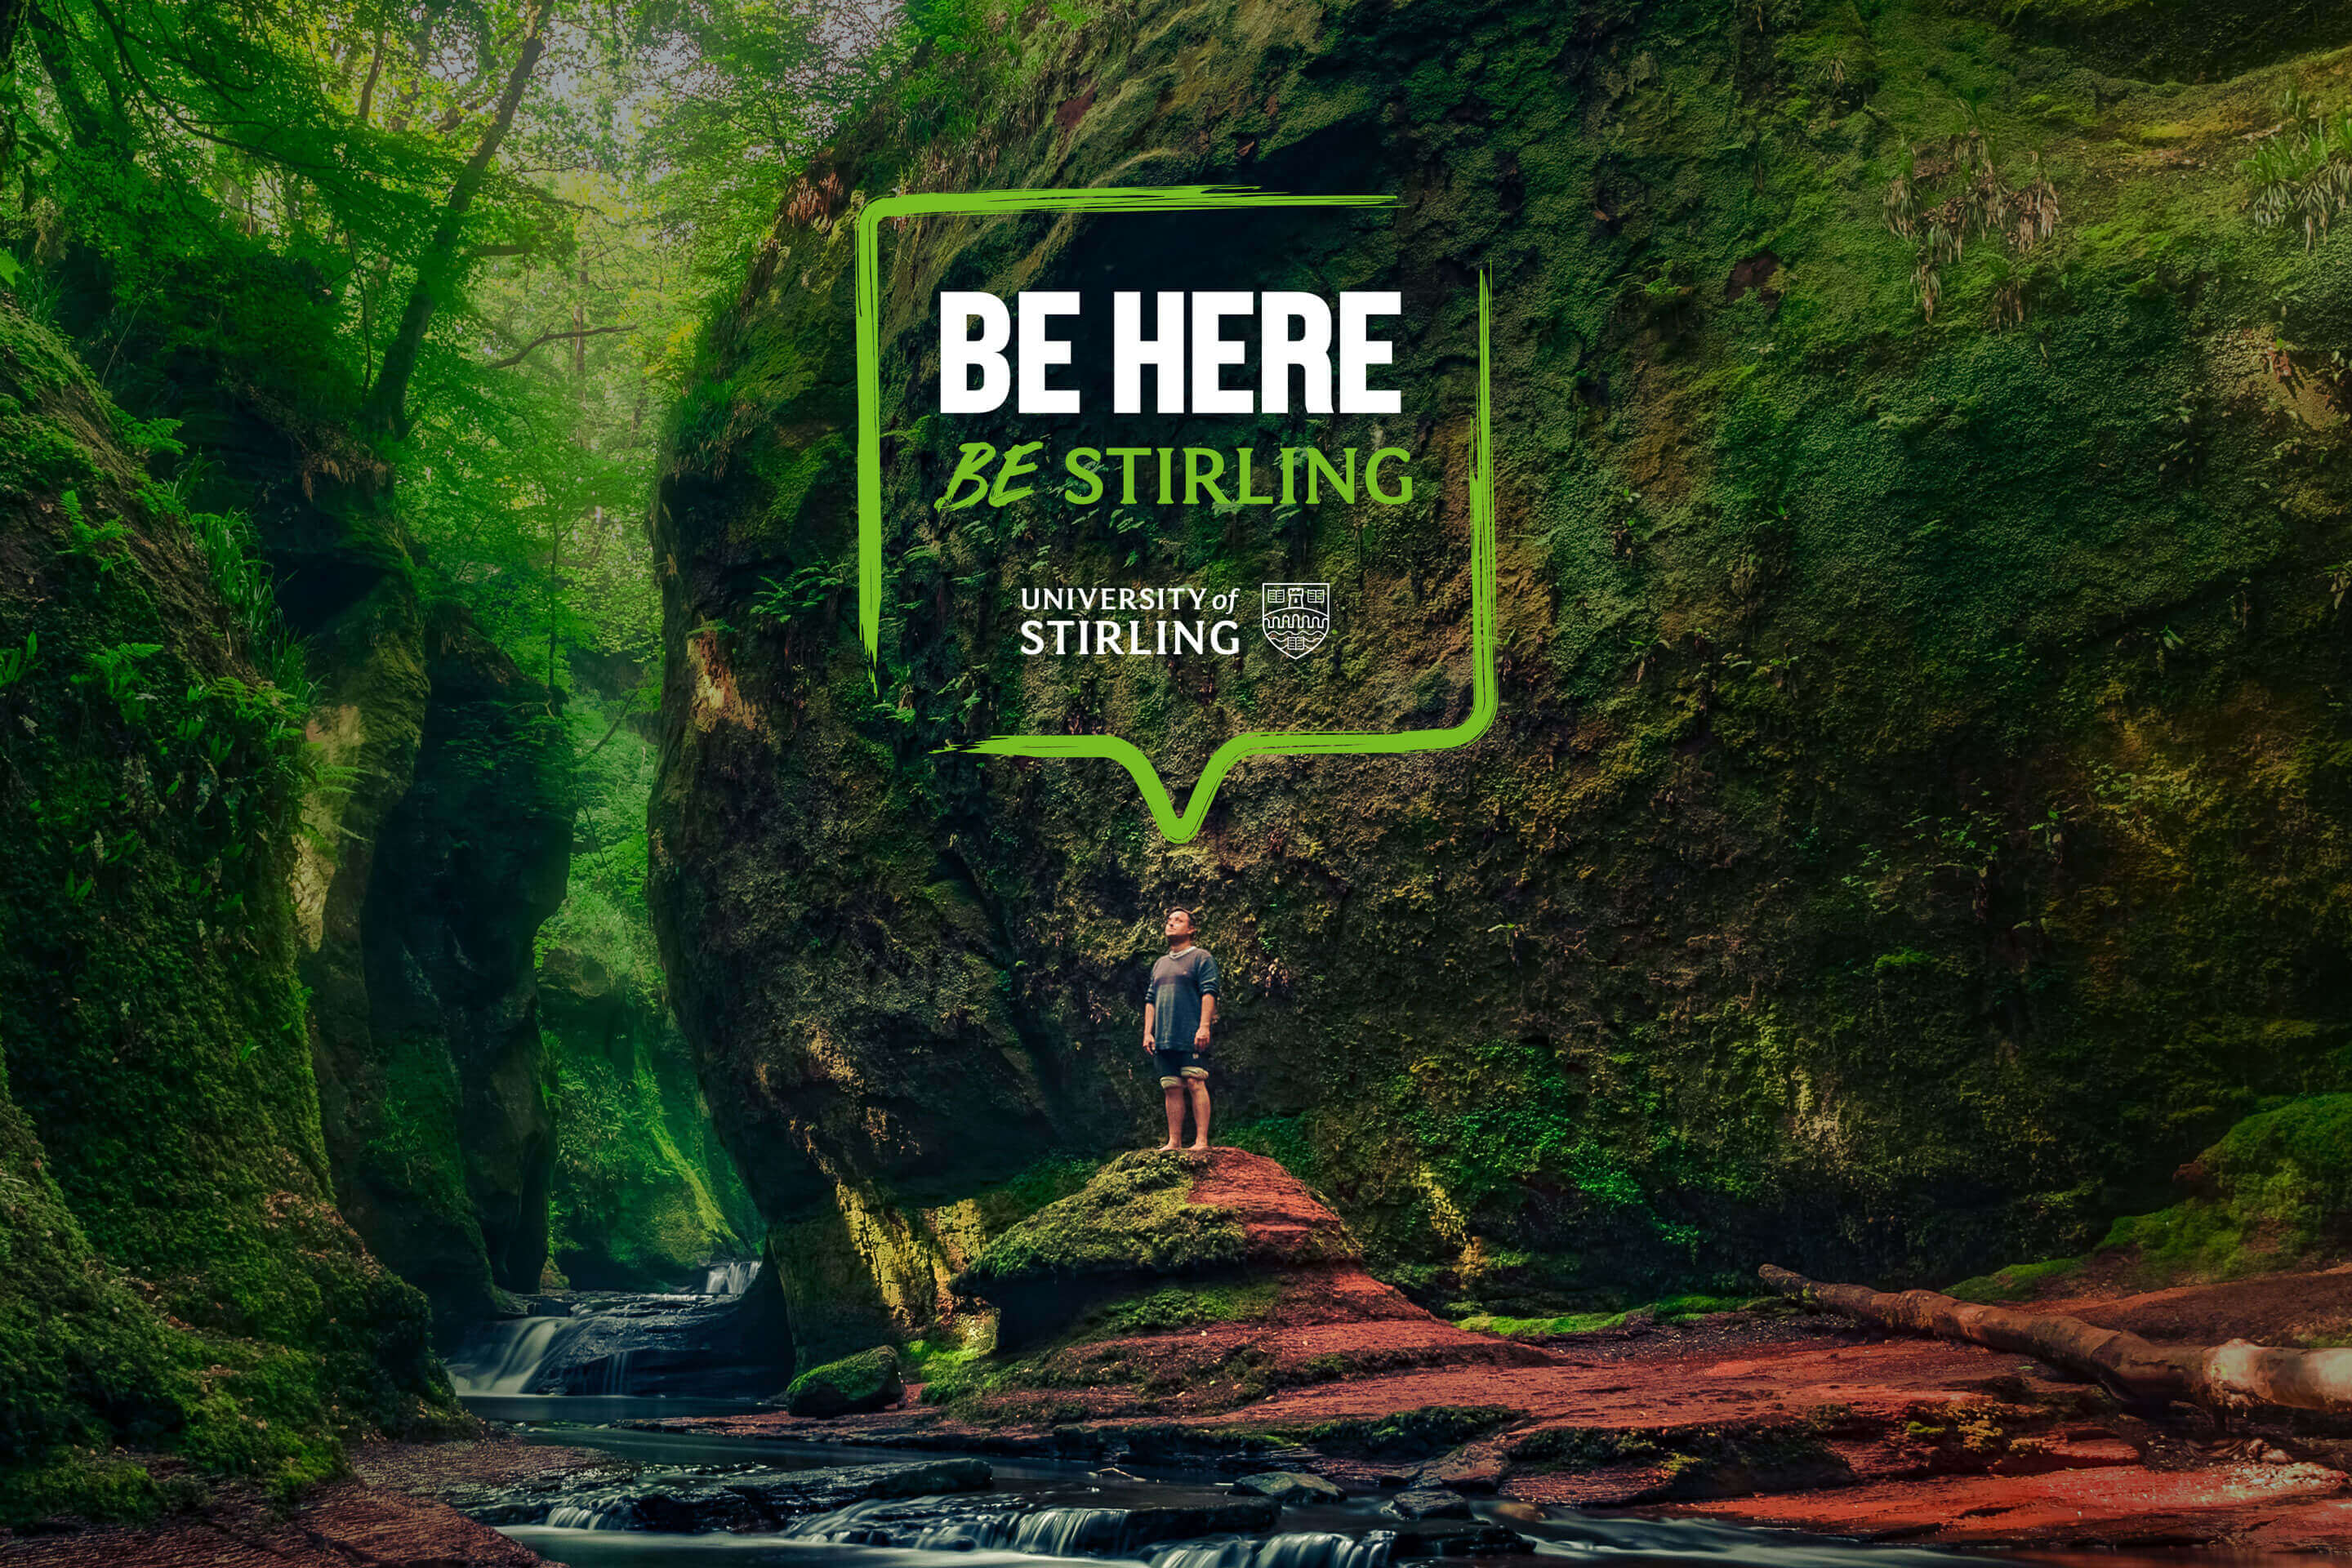 University of Stirling, Be Here Be Stirling